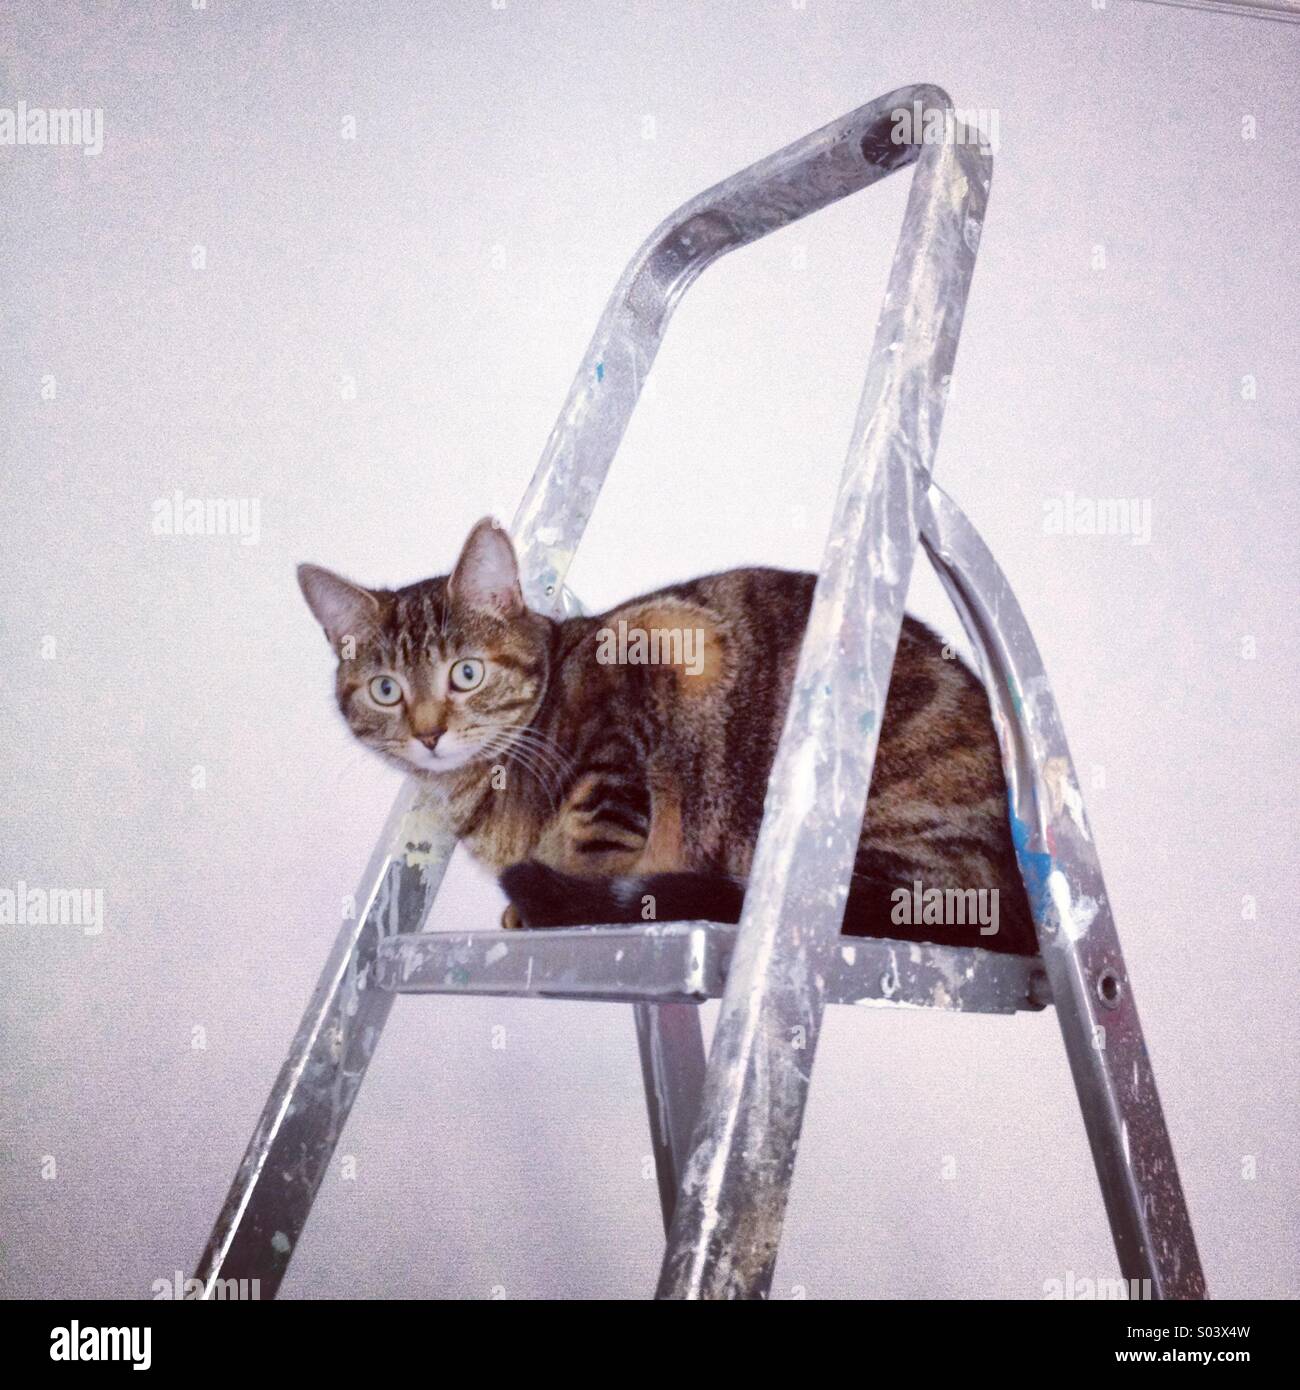 Tabby cat sitting on step ladders Stock Photo